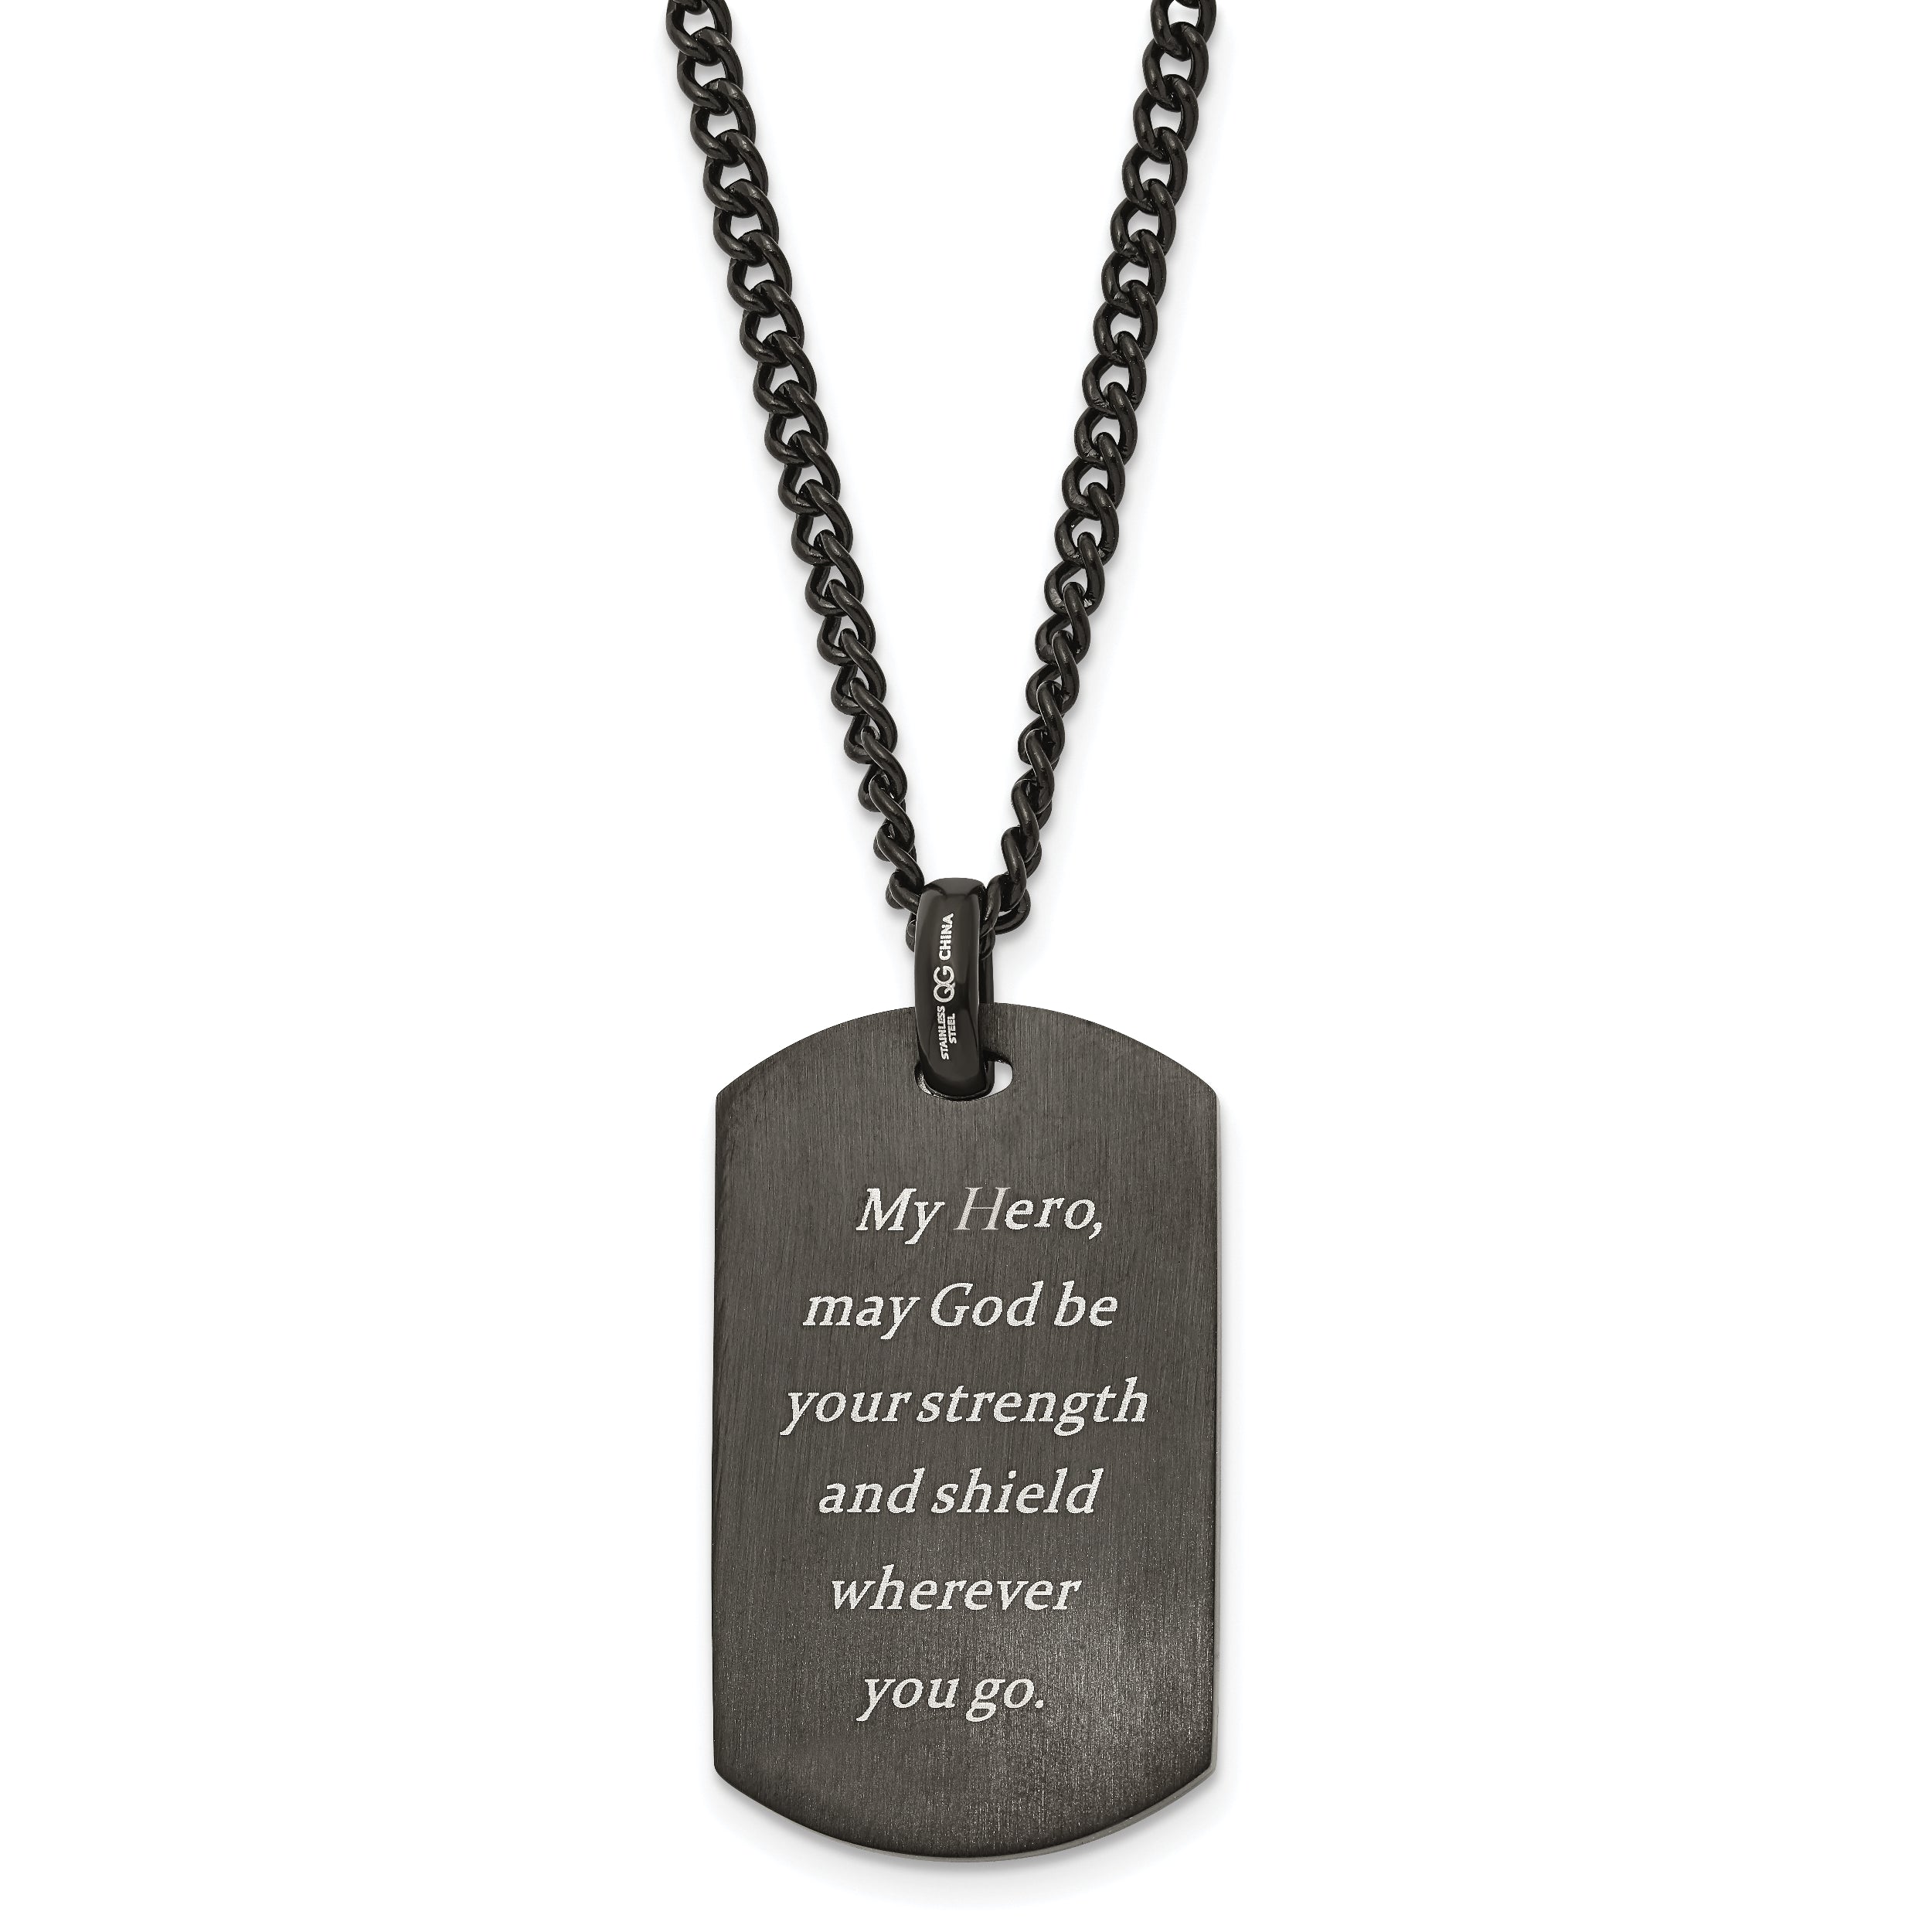 Chisel Stainless Steel Polished Black and Yellow IP-plated with CZ HERO Dog Tag on a 24 inch Curb Chain Necklace